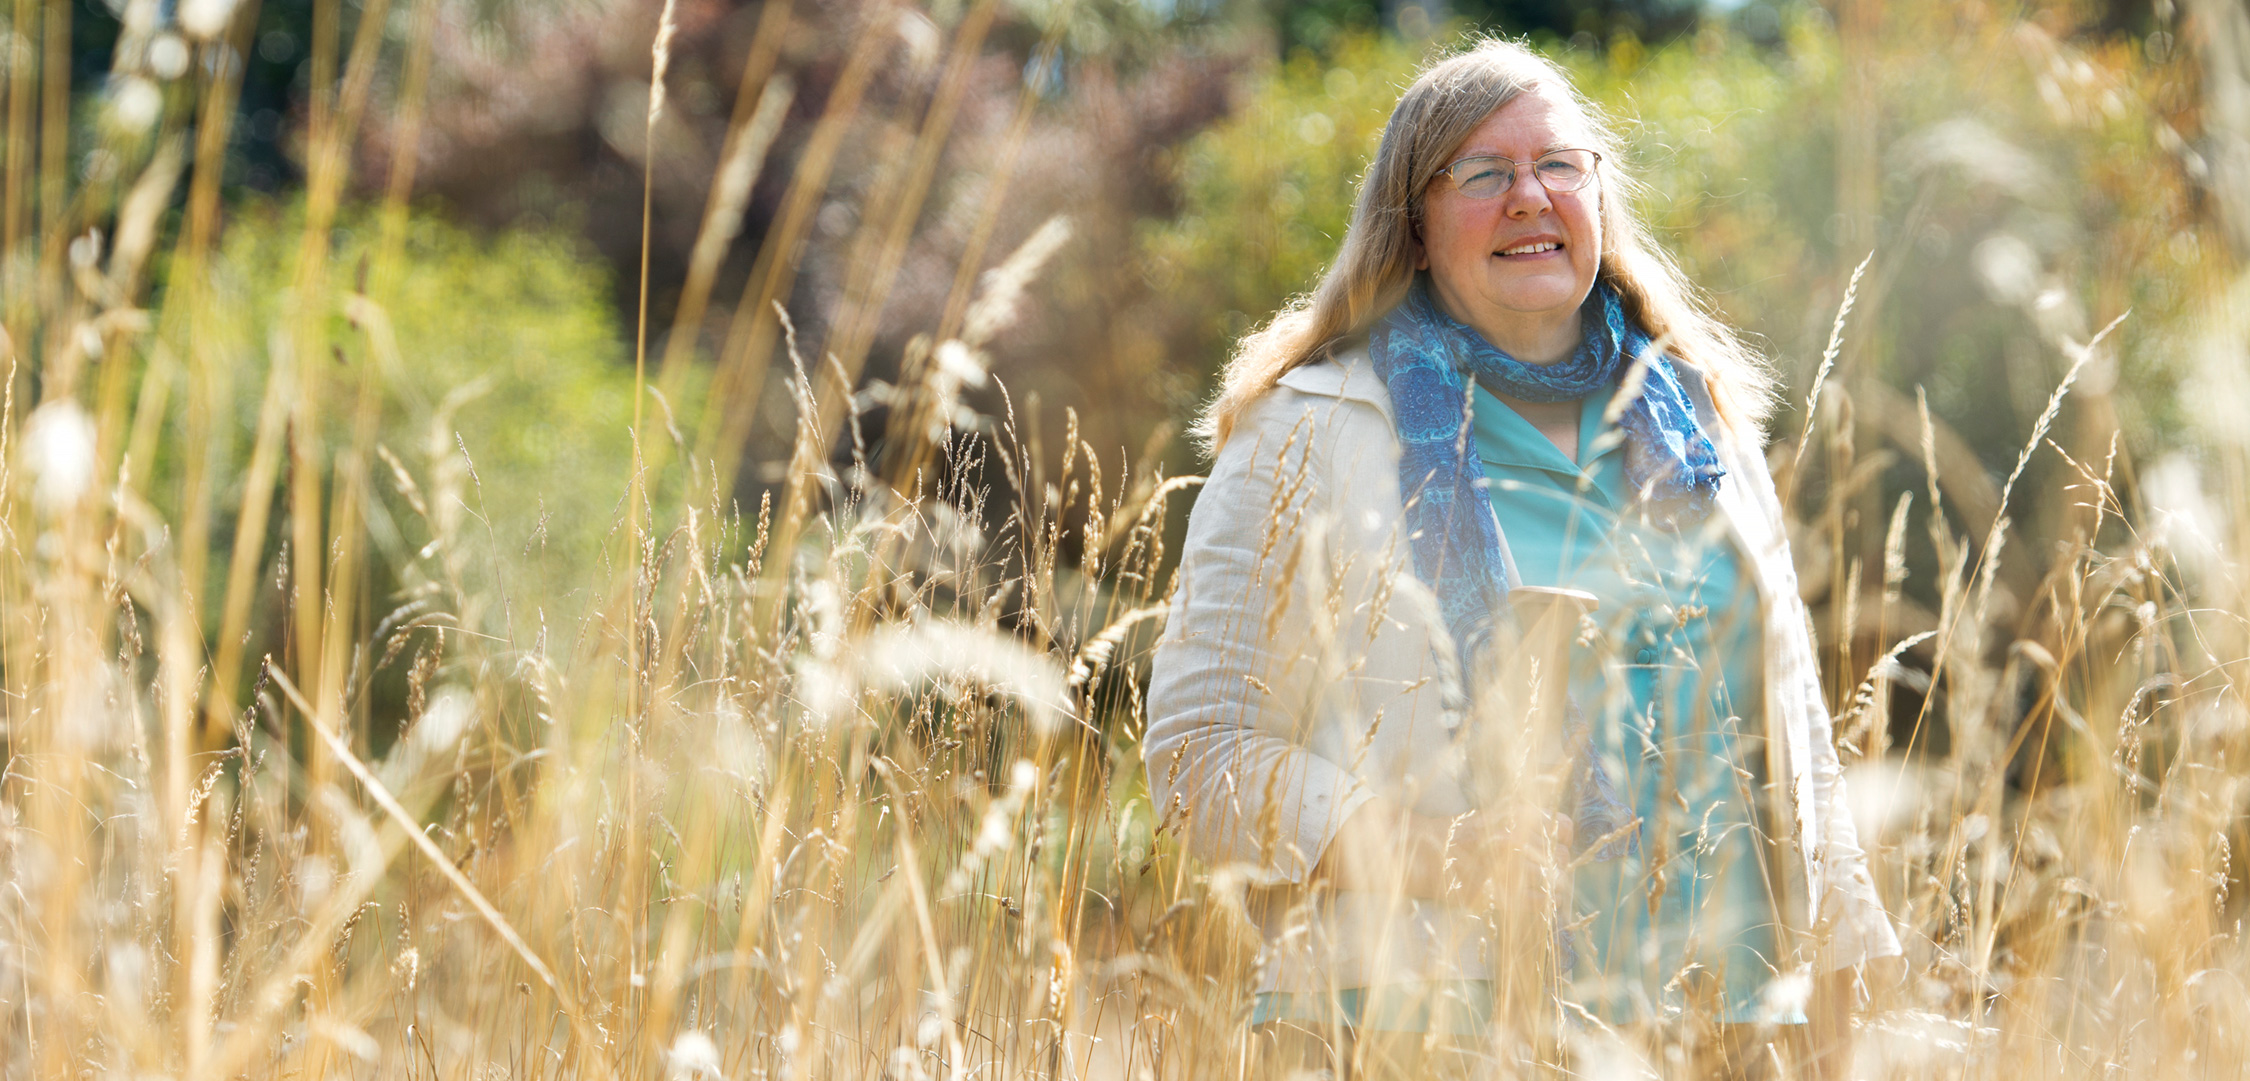 For decades, ethnobotanist Nancy Turner has roamed Canada’s west coast, recording how First Nations elders dug roots, picked berries, and prepared ancient foods. Photo by UVic Photo Services